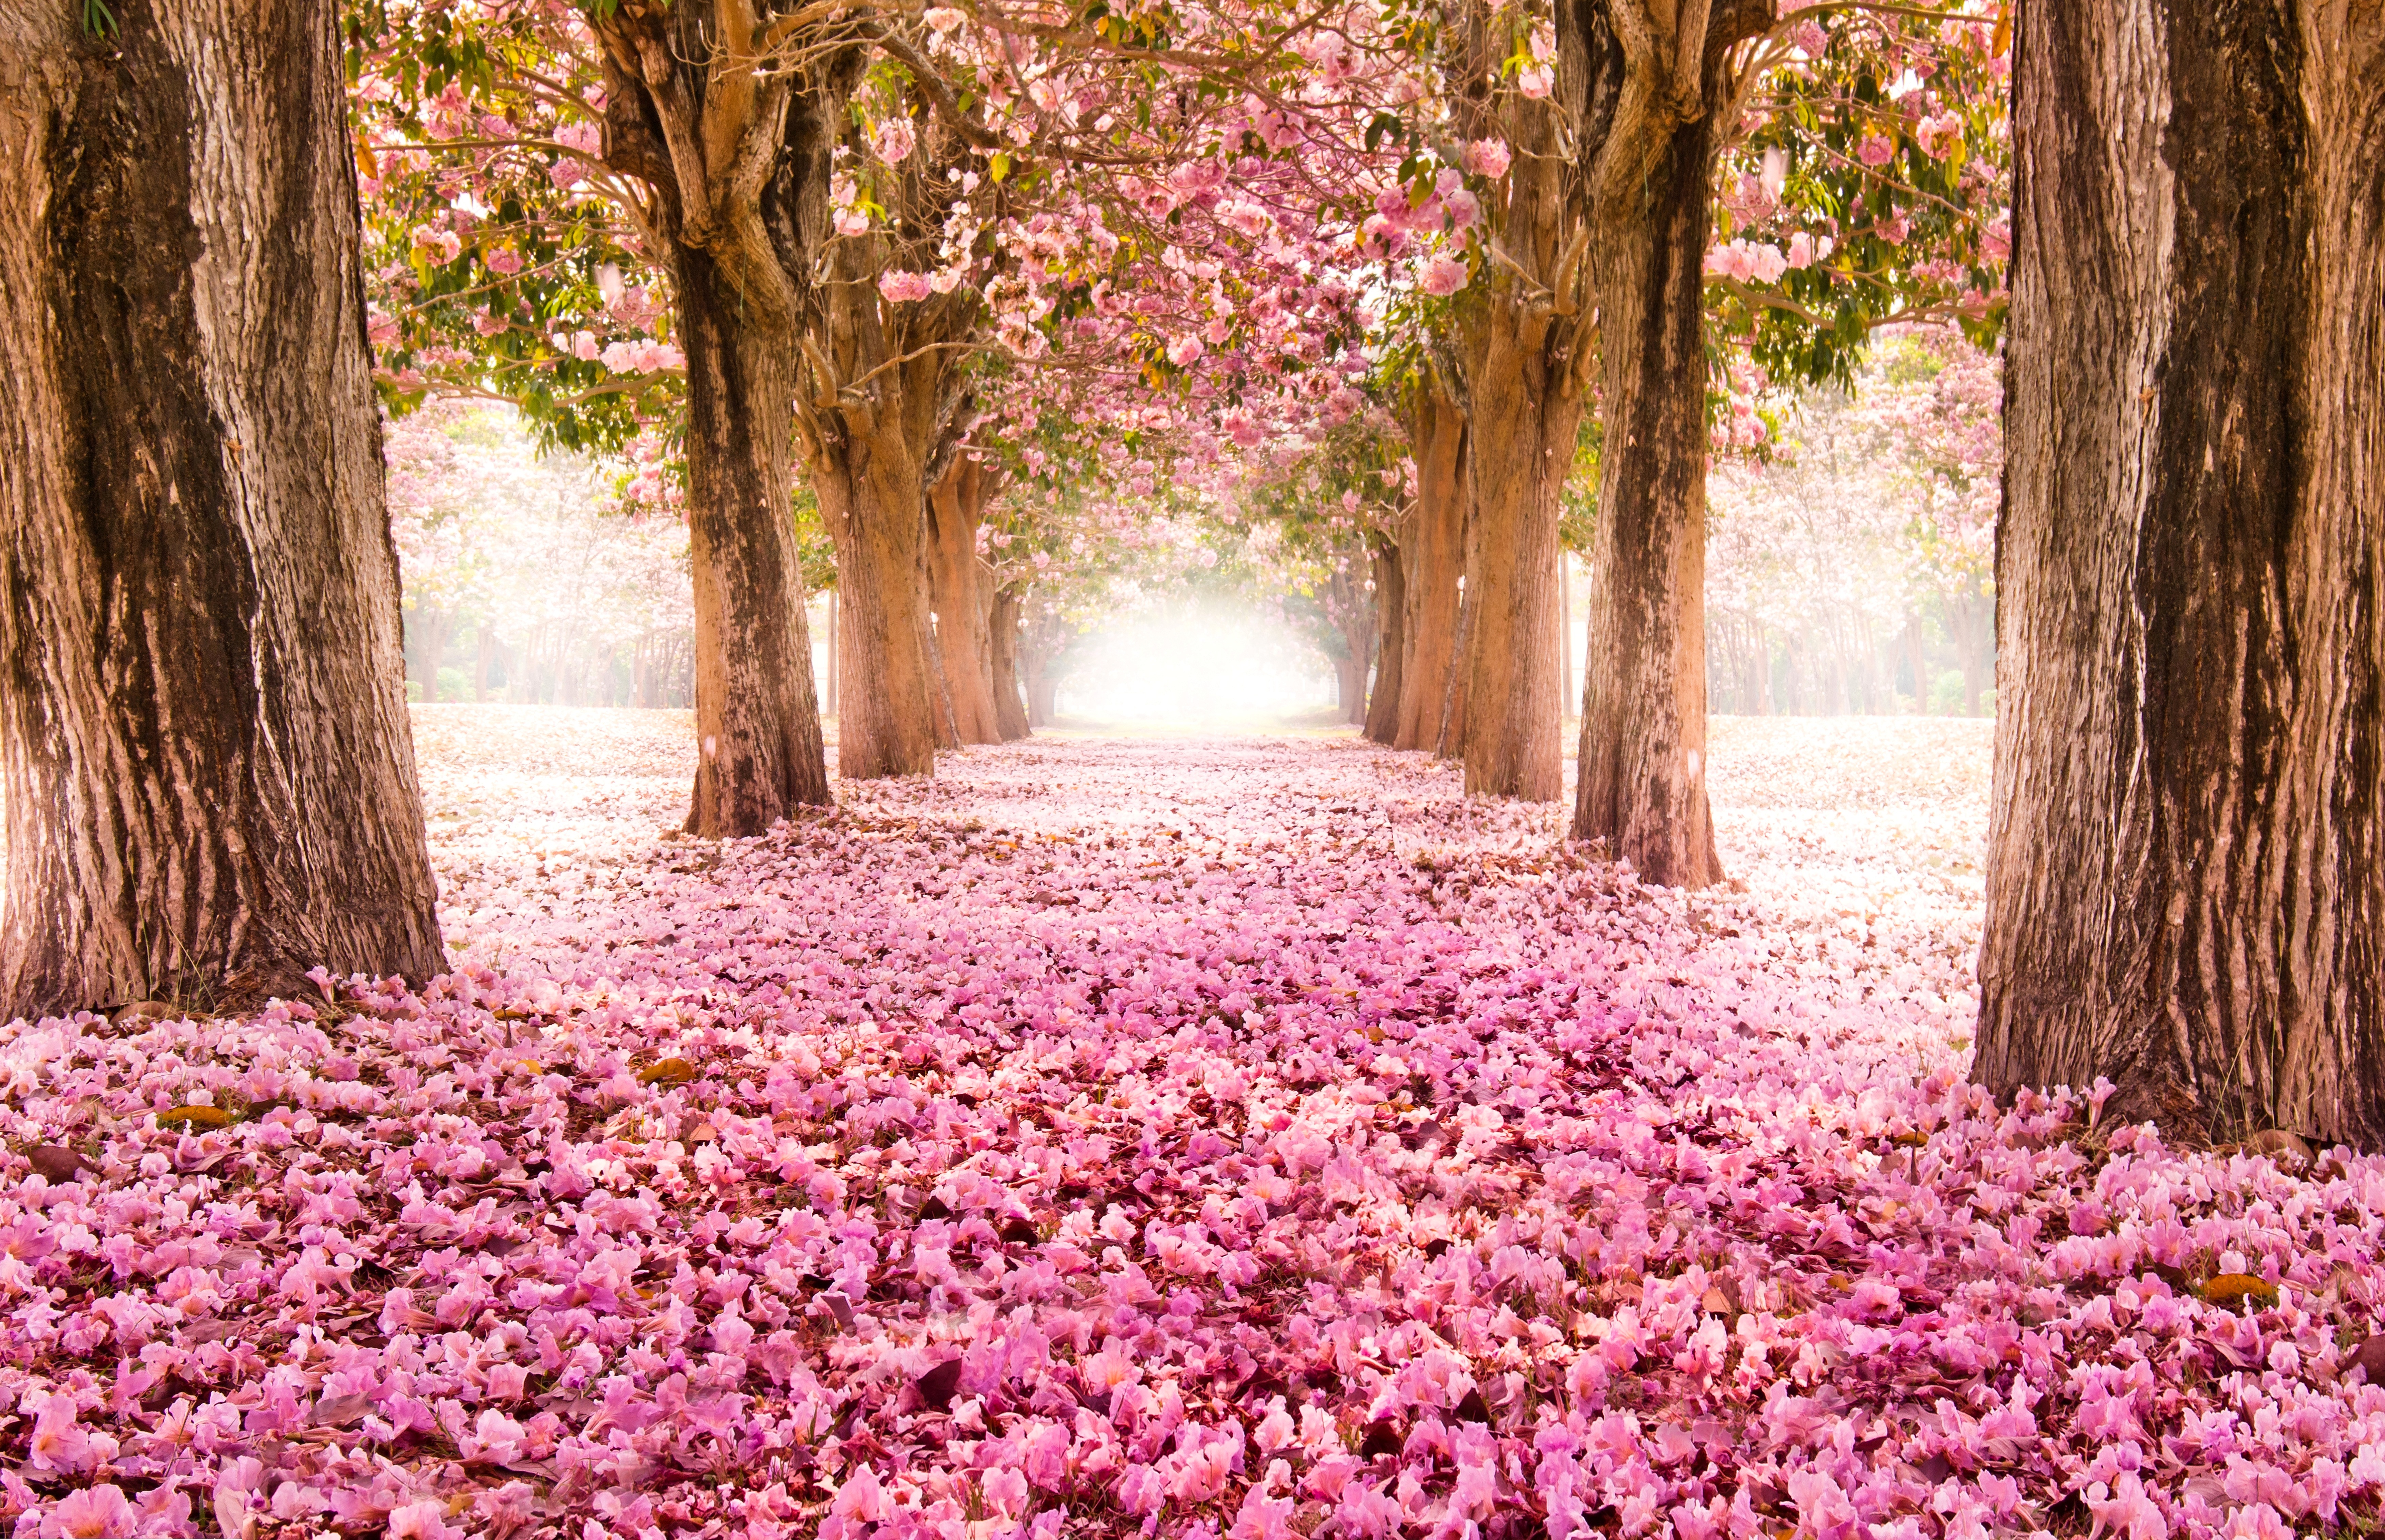 Field of pink flowers » Nature » OldtimeWallpapers.com - Antique ...